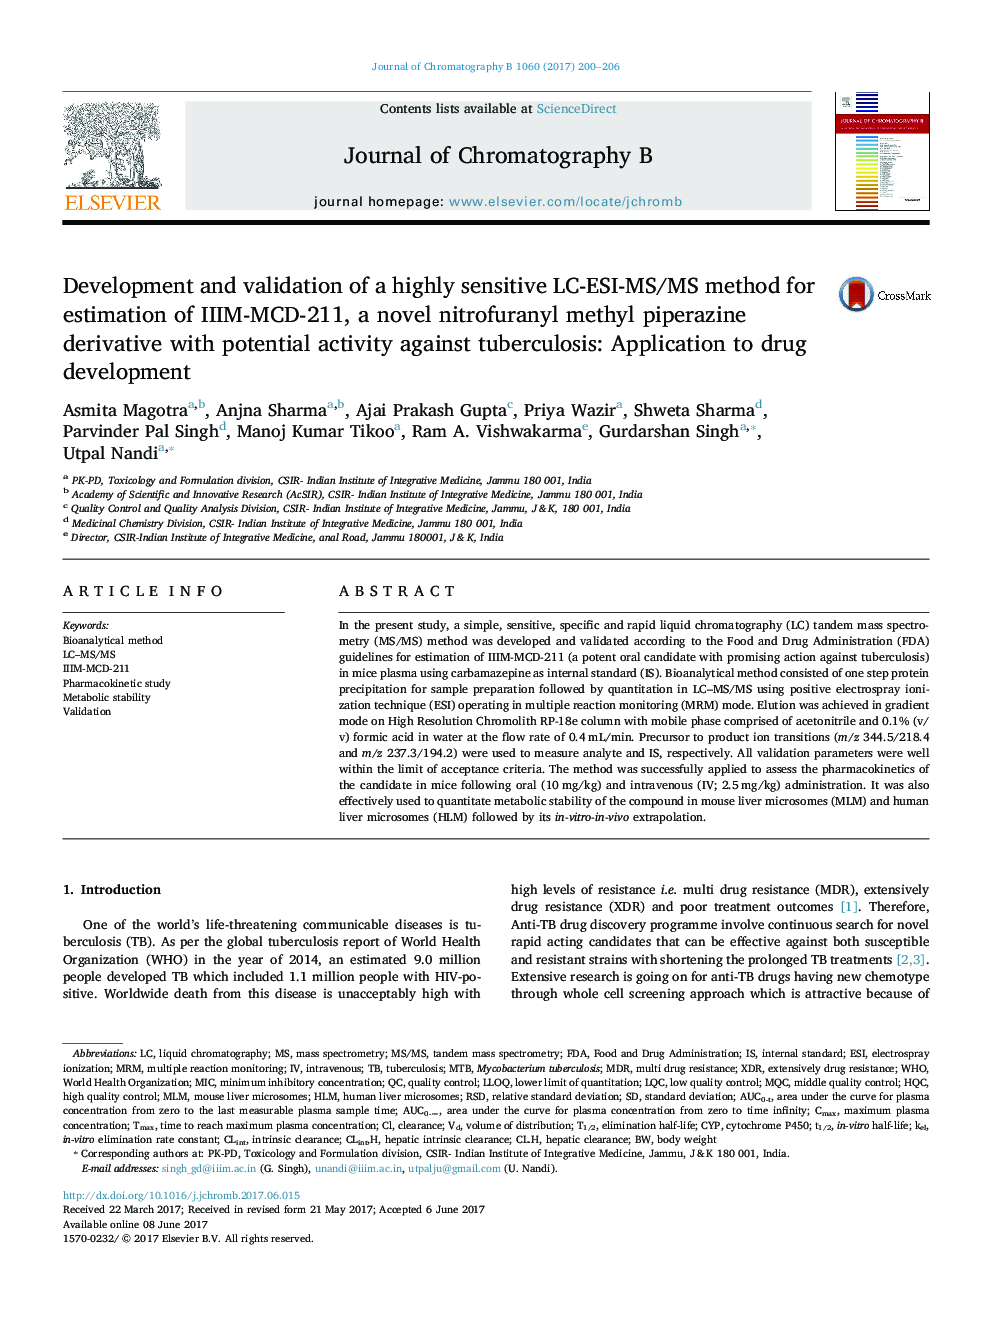 Development and validation of a highly sensitive LC-ESI-MS/MS method for estimation of IIIM-MCD-211, a novel nitrofuranyl methyl piperazine derivative with potential activity against tuberculosis: Application to drug development